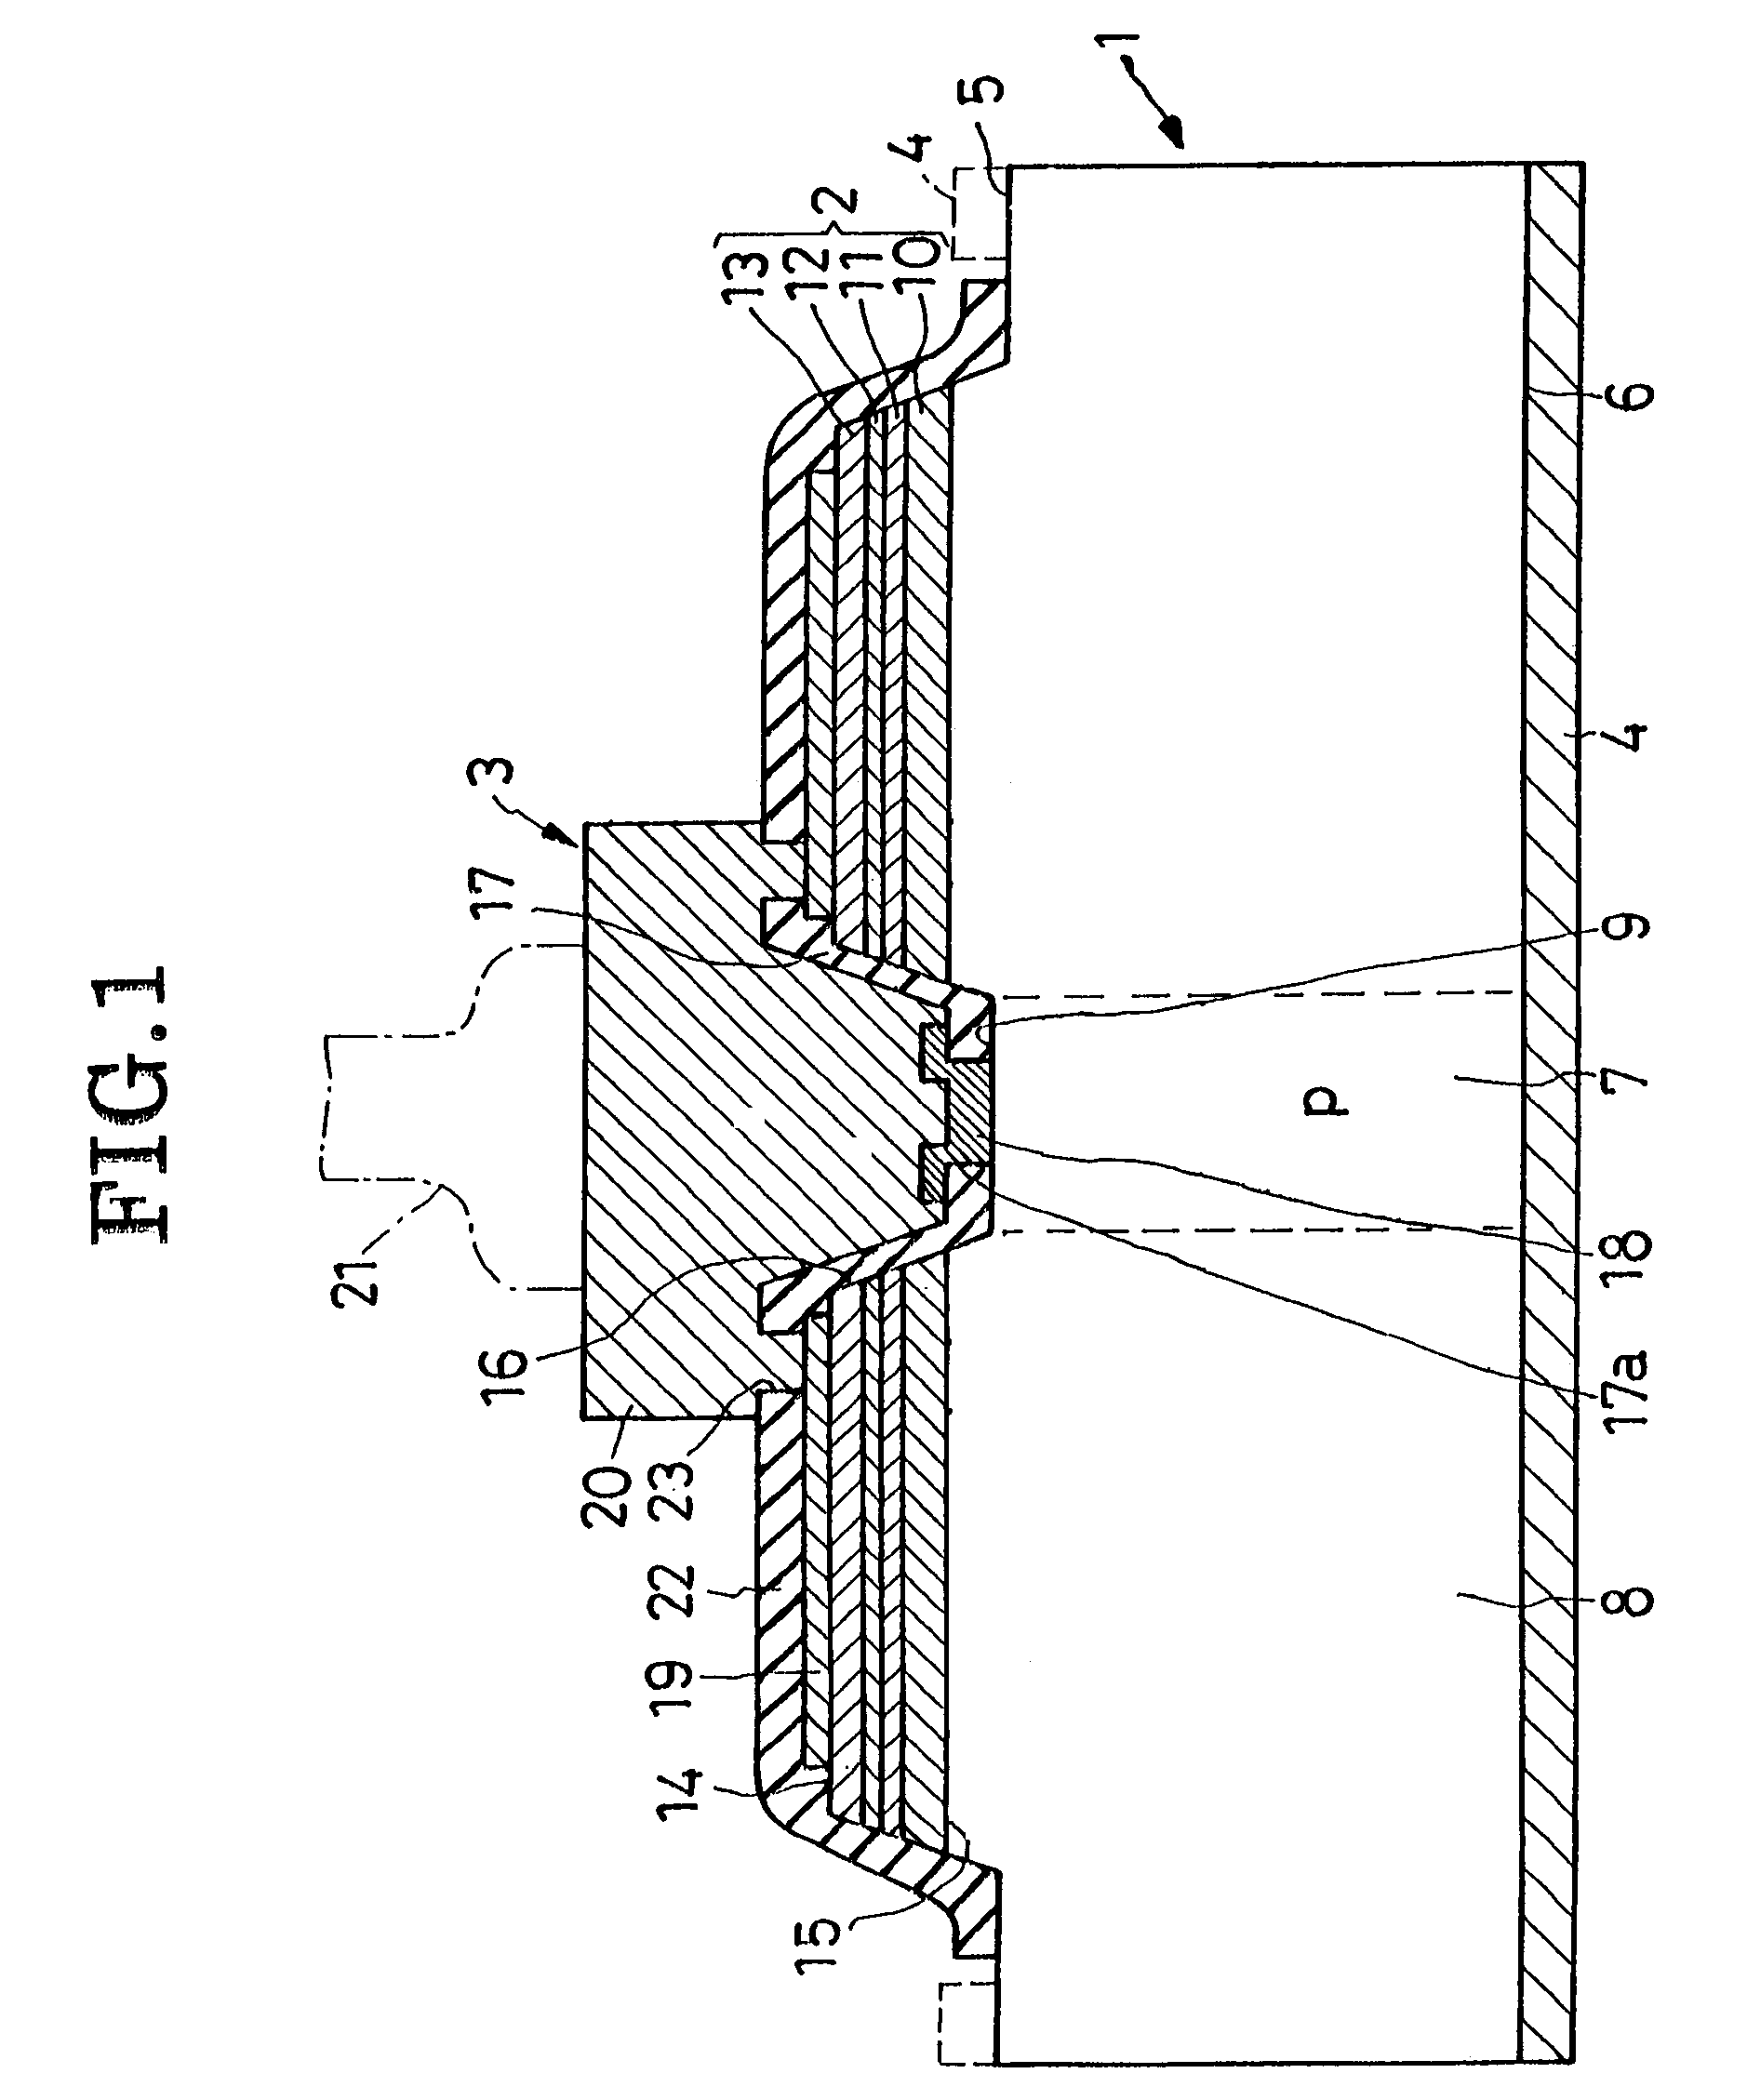 Light-emitting semiconductor device with a built-in overvoltage protector